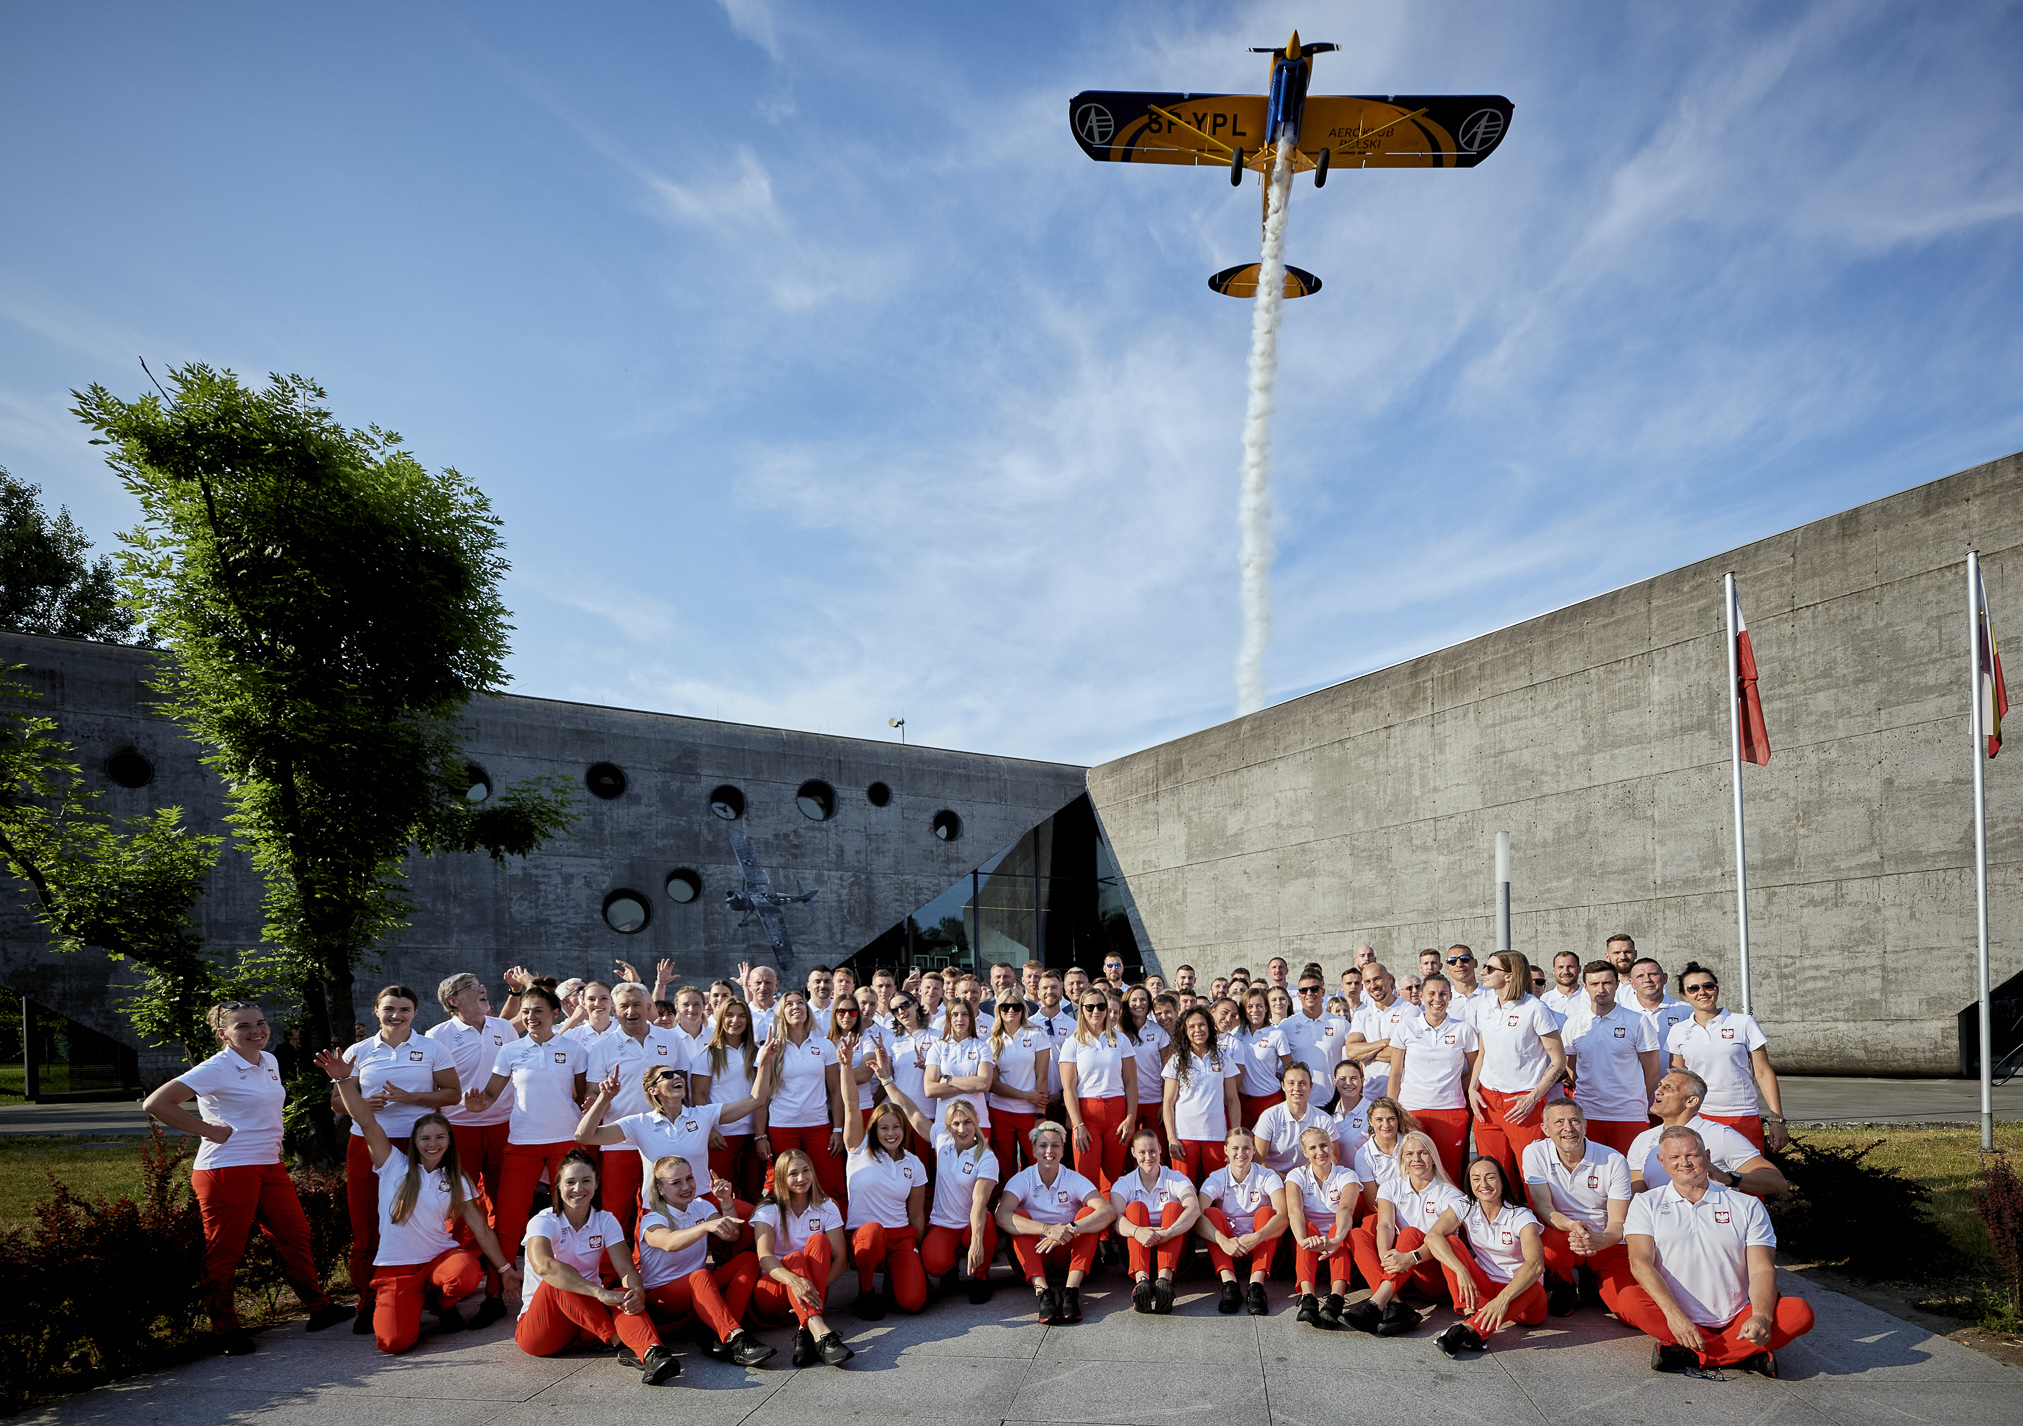 Poland’s national team for the European Games took the oath of athletes